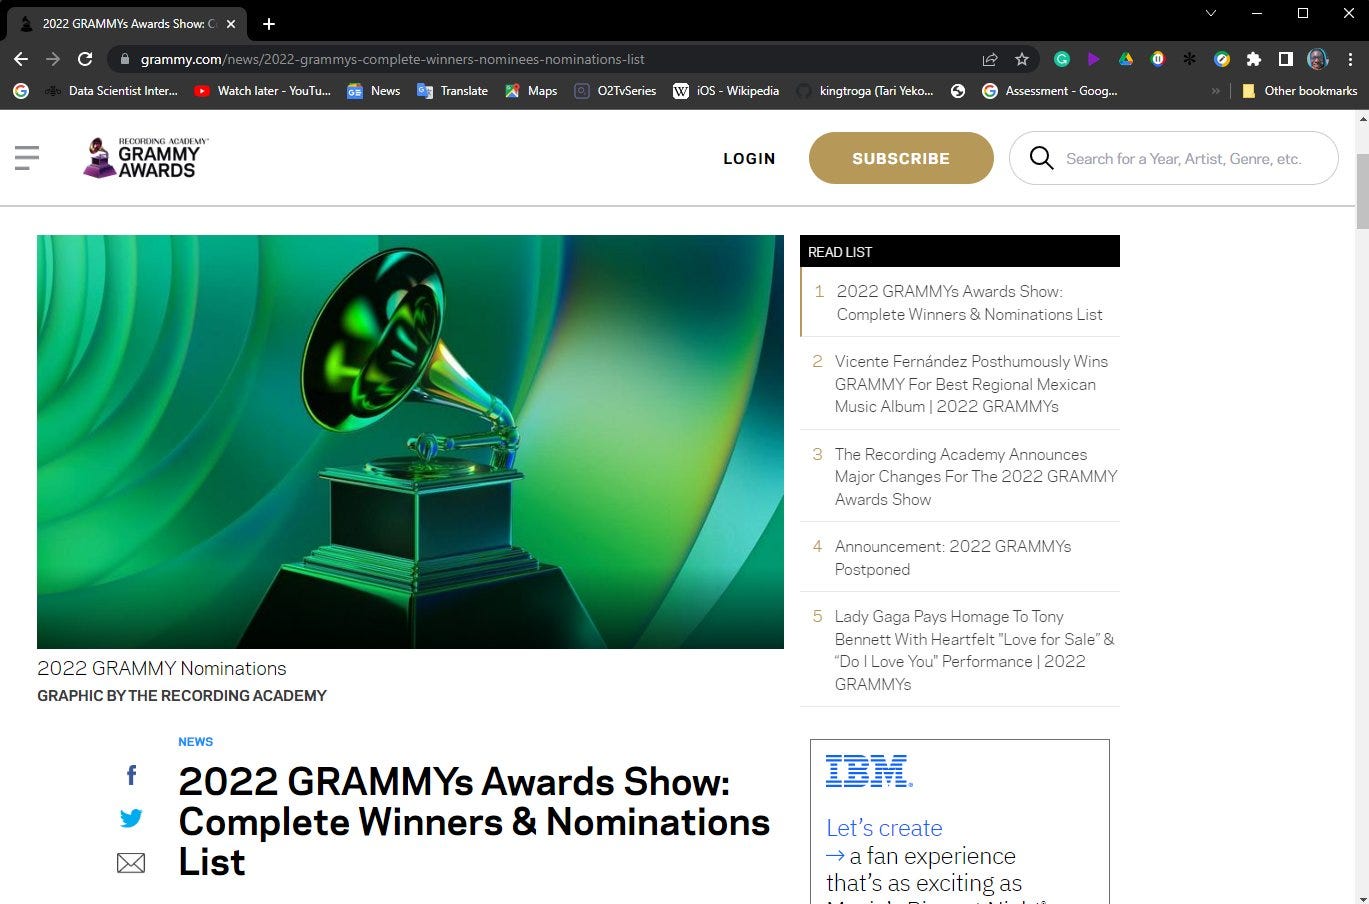 2022 GRAMMYs Awards Show: Complete Winners & Nominations List